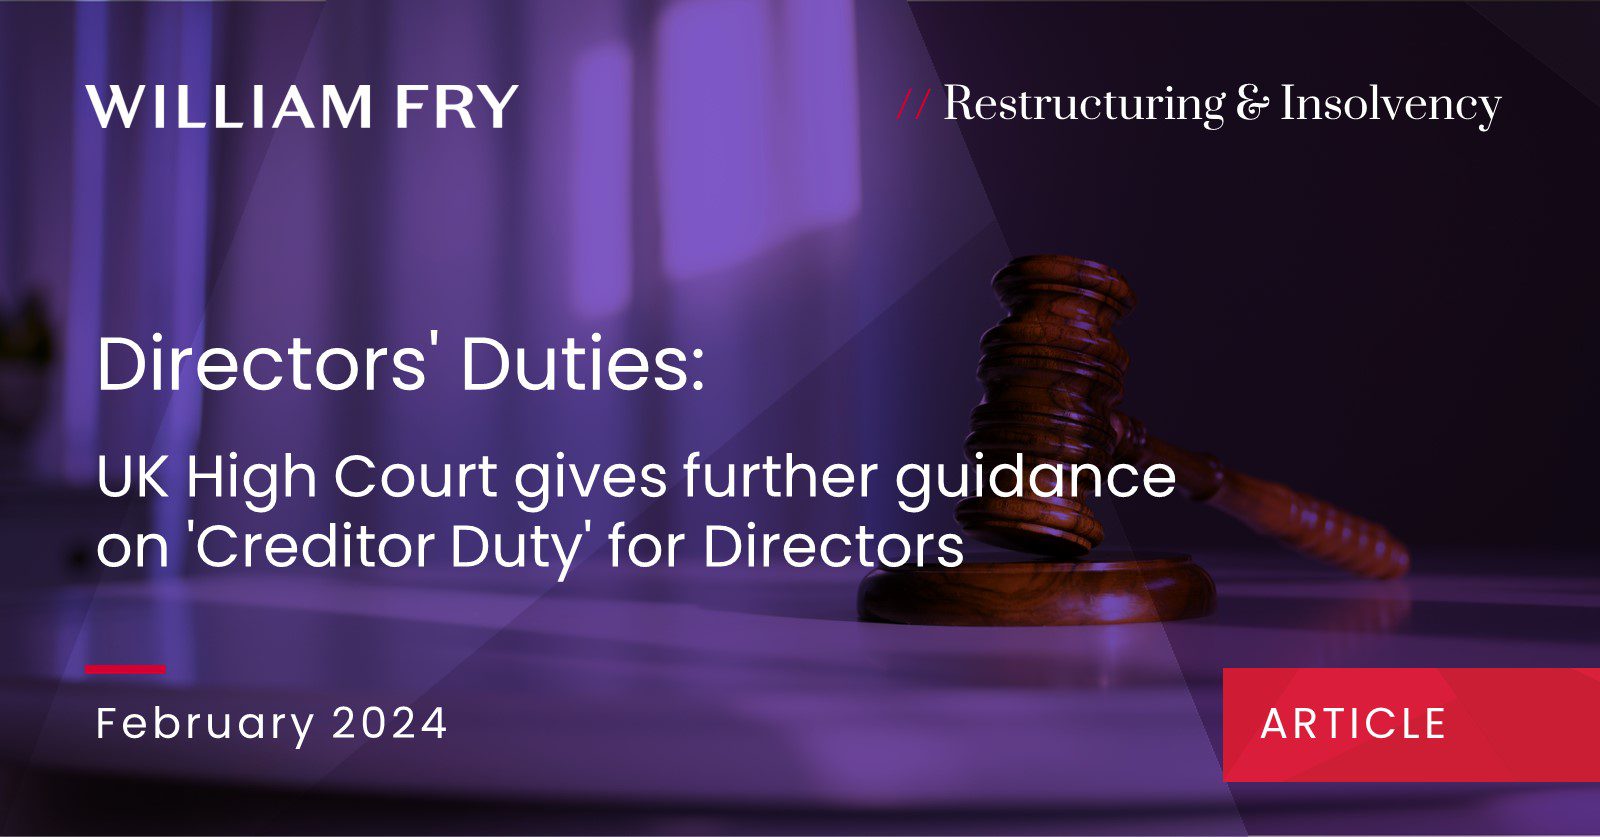 Directors' Duties: UK High Court gives further guidance on 'Creditor Duty' for Directors